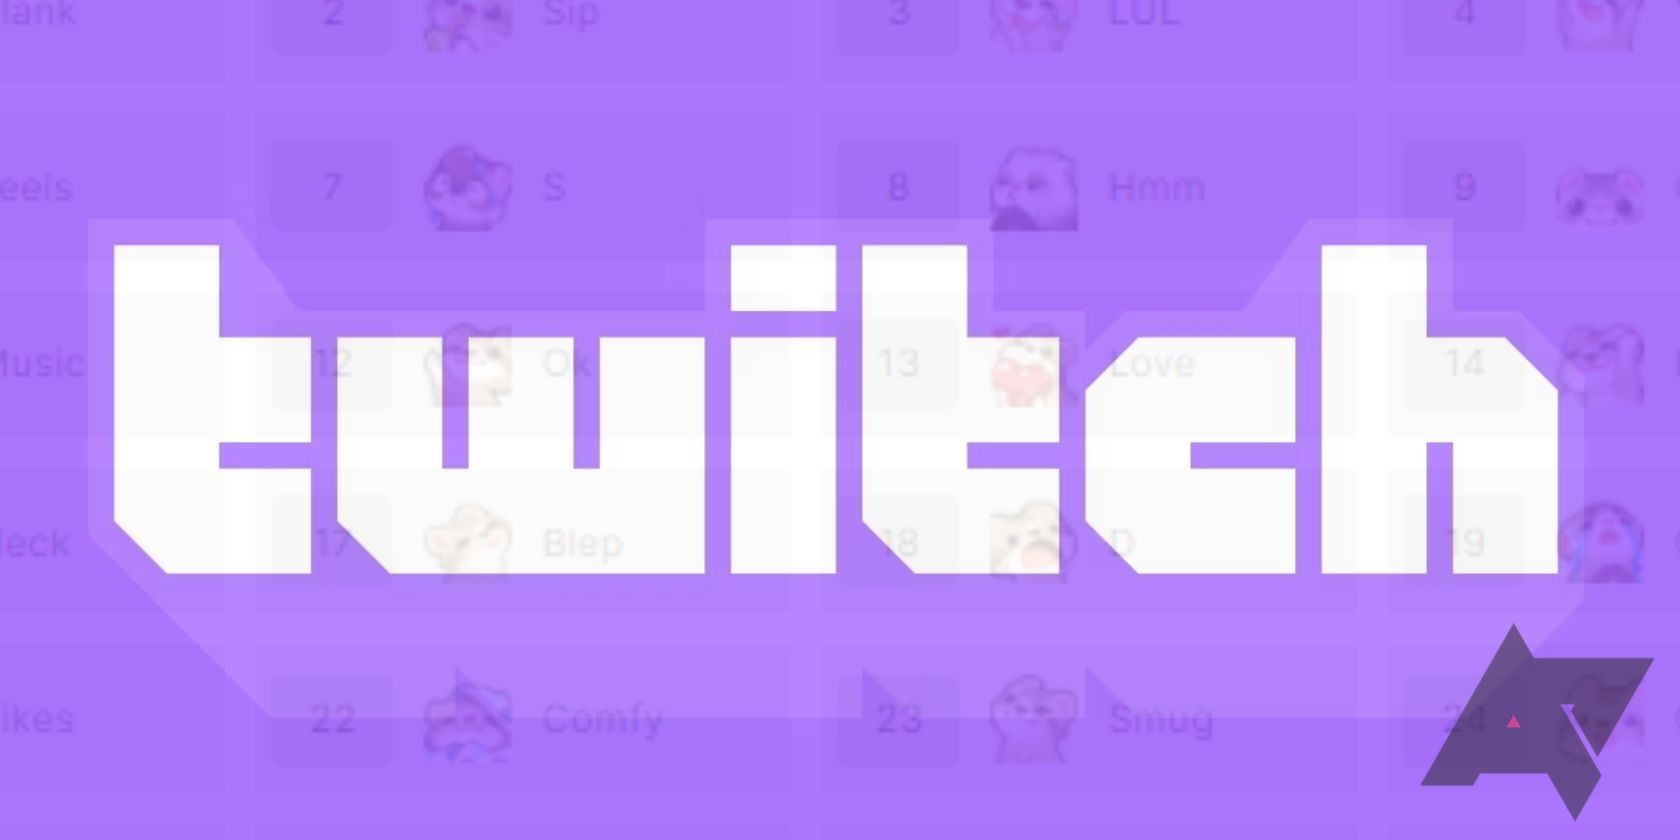 twitch logo superimposed over purple background